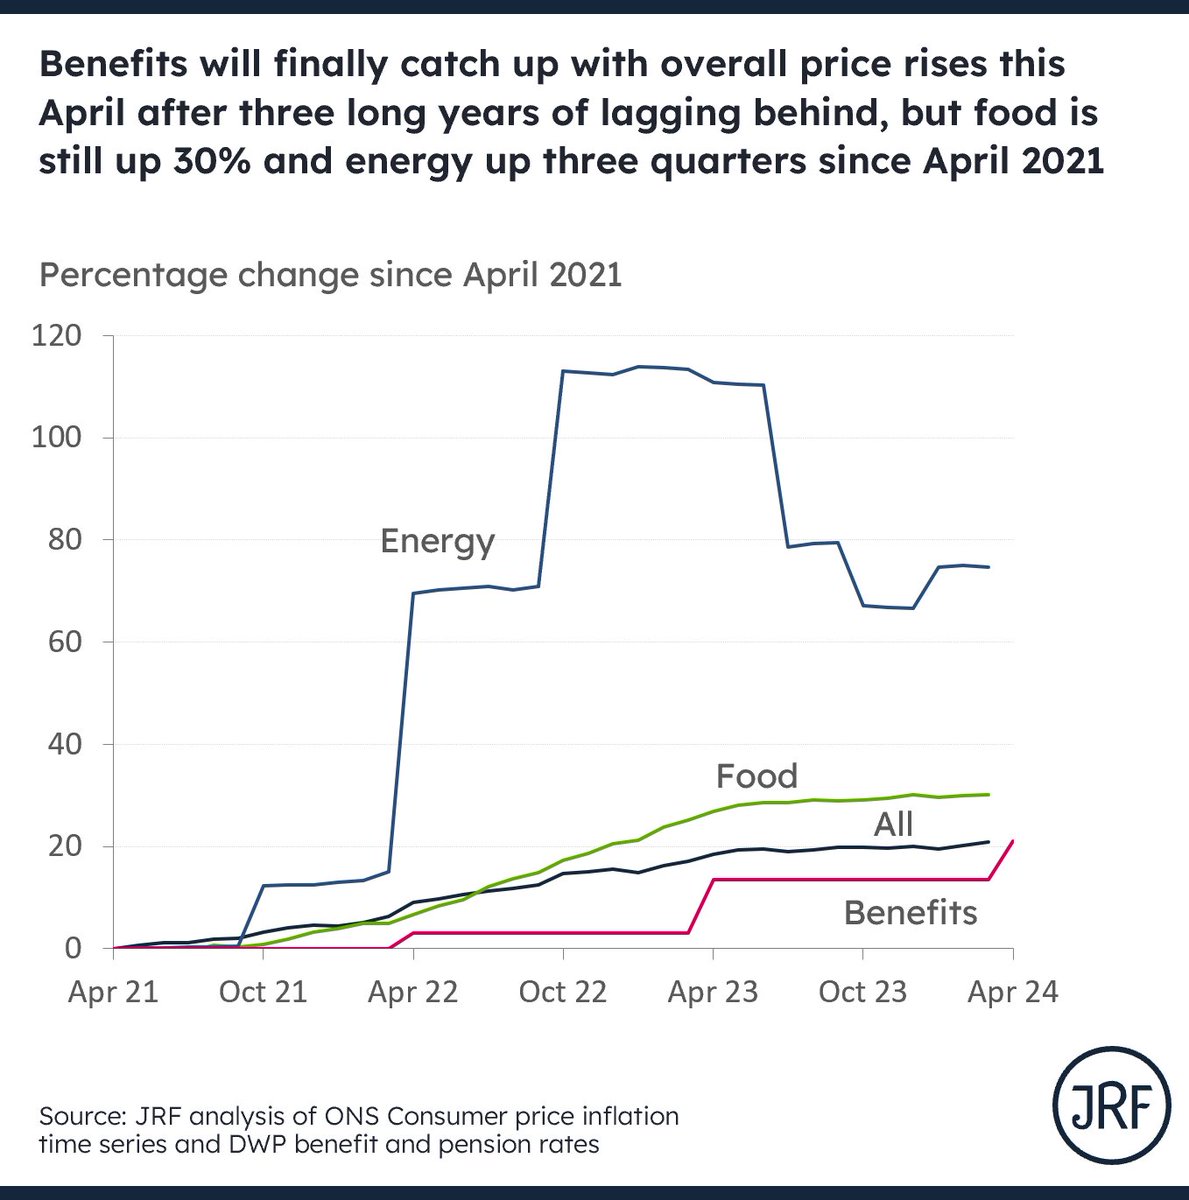 New #inflation data out today from @ONS. Food and energy still cost much more than a few years ago, despite muted movements in recent months. After three long years of lagging behind, benefit levels are only now catching up with prices.